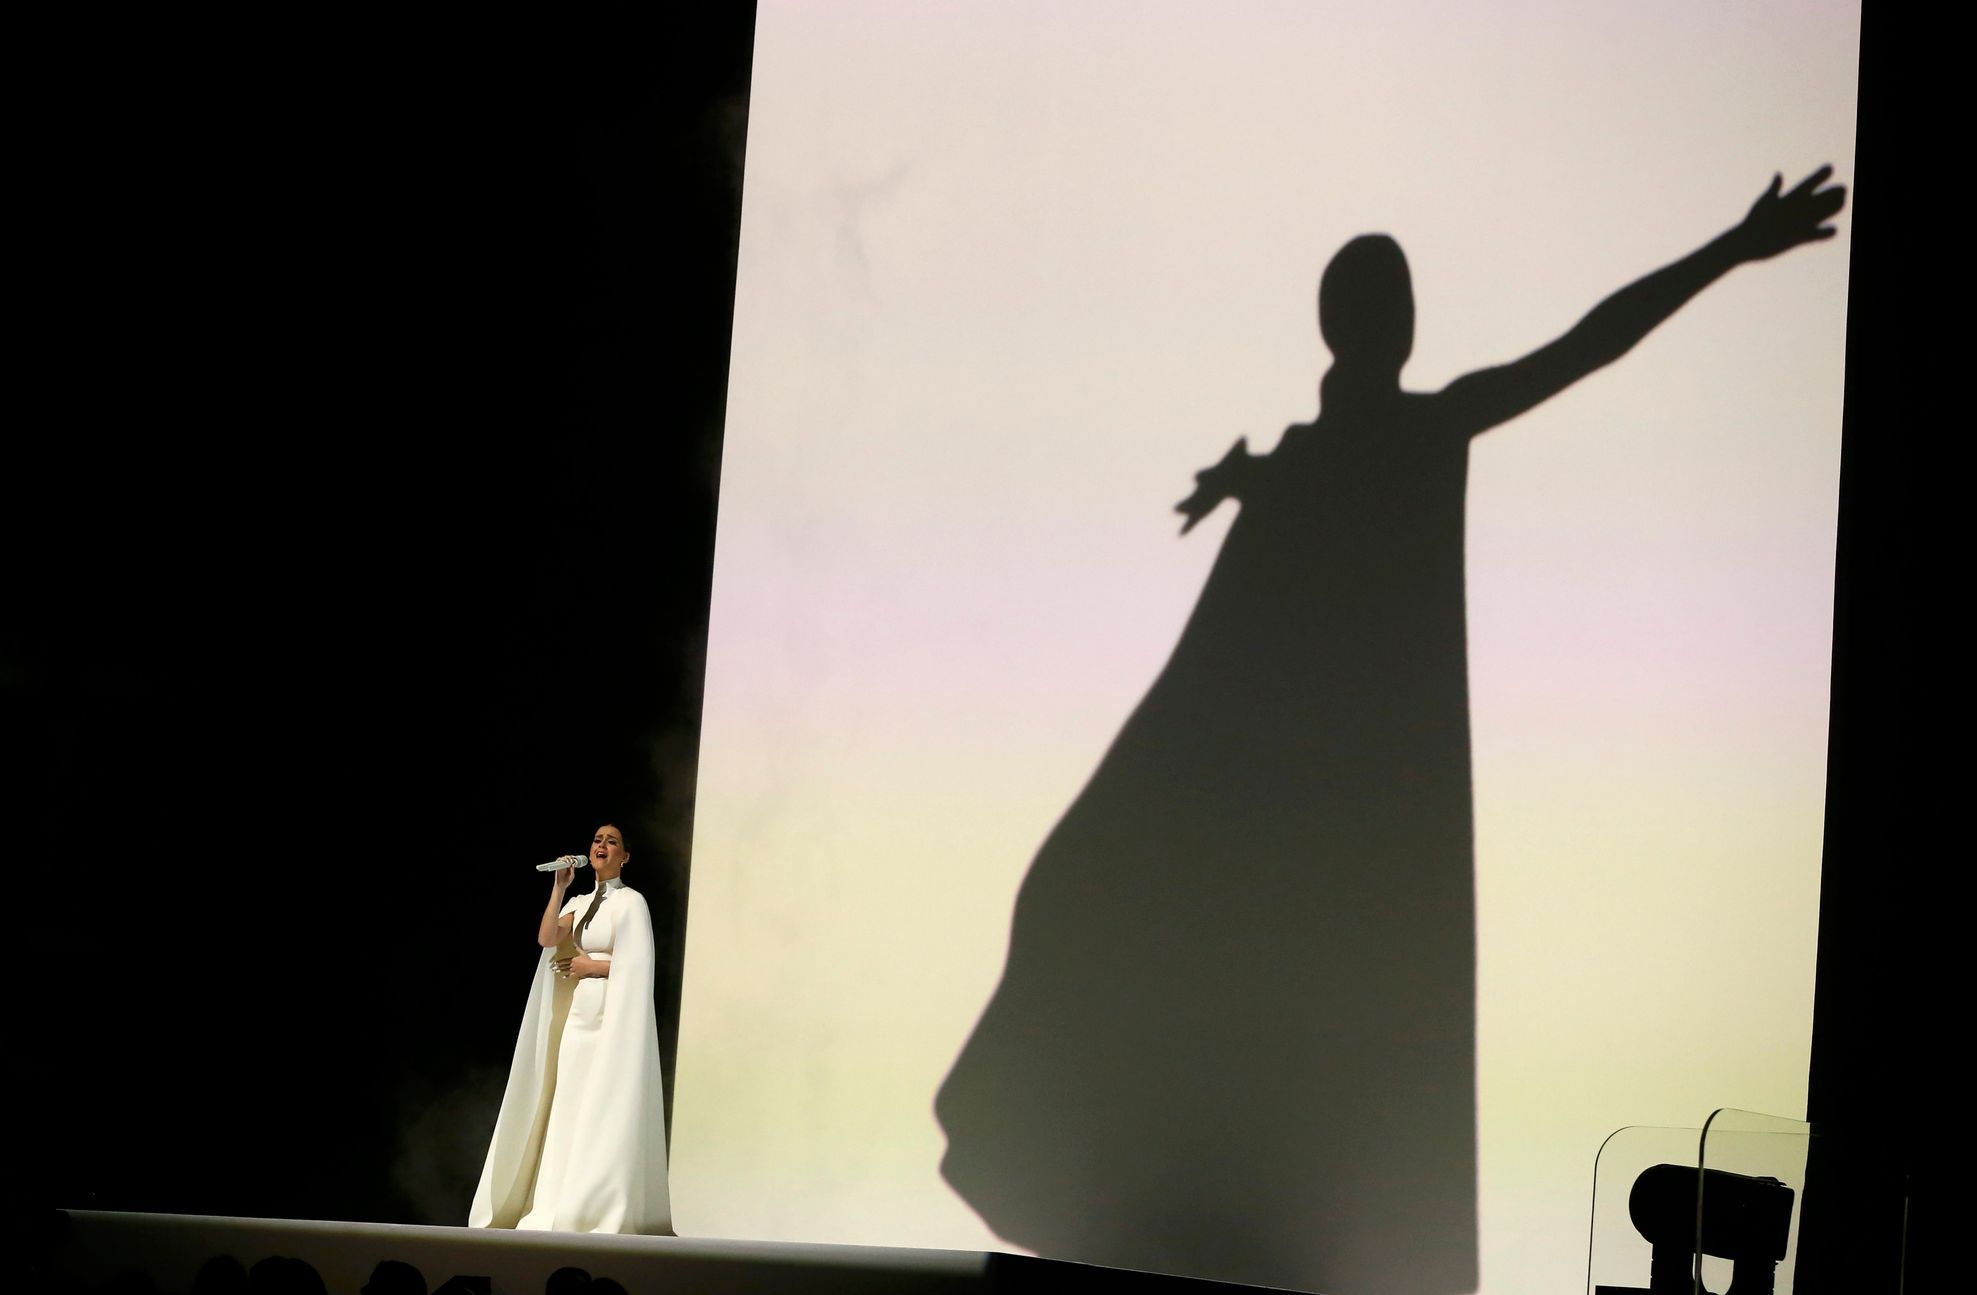 Katy Perry performs &quot;By The Grace of God&quot; at the 57th annual Grammy Awards in Los Angeles